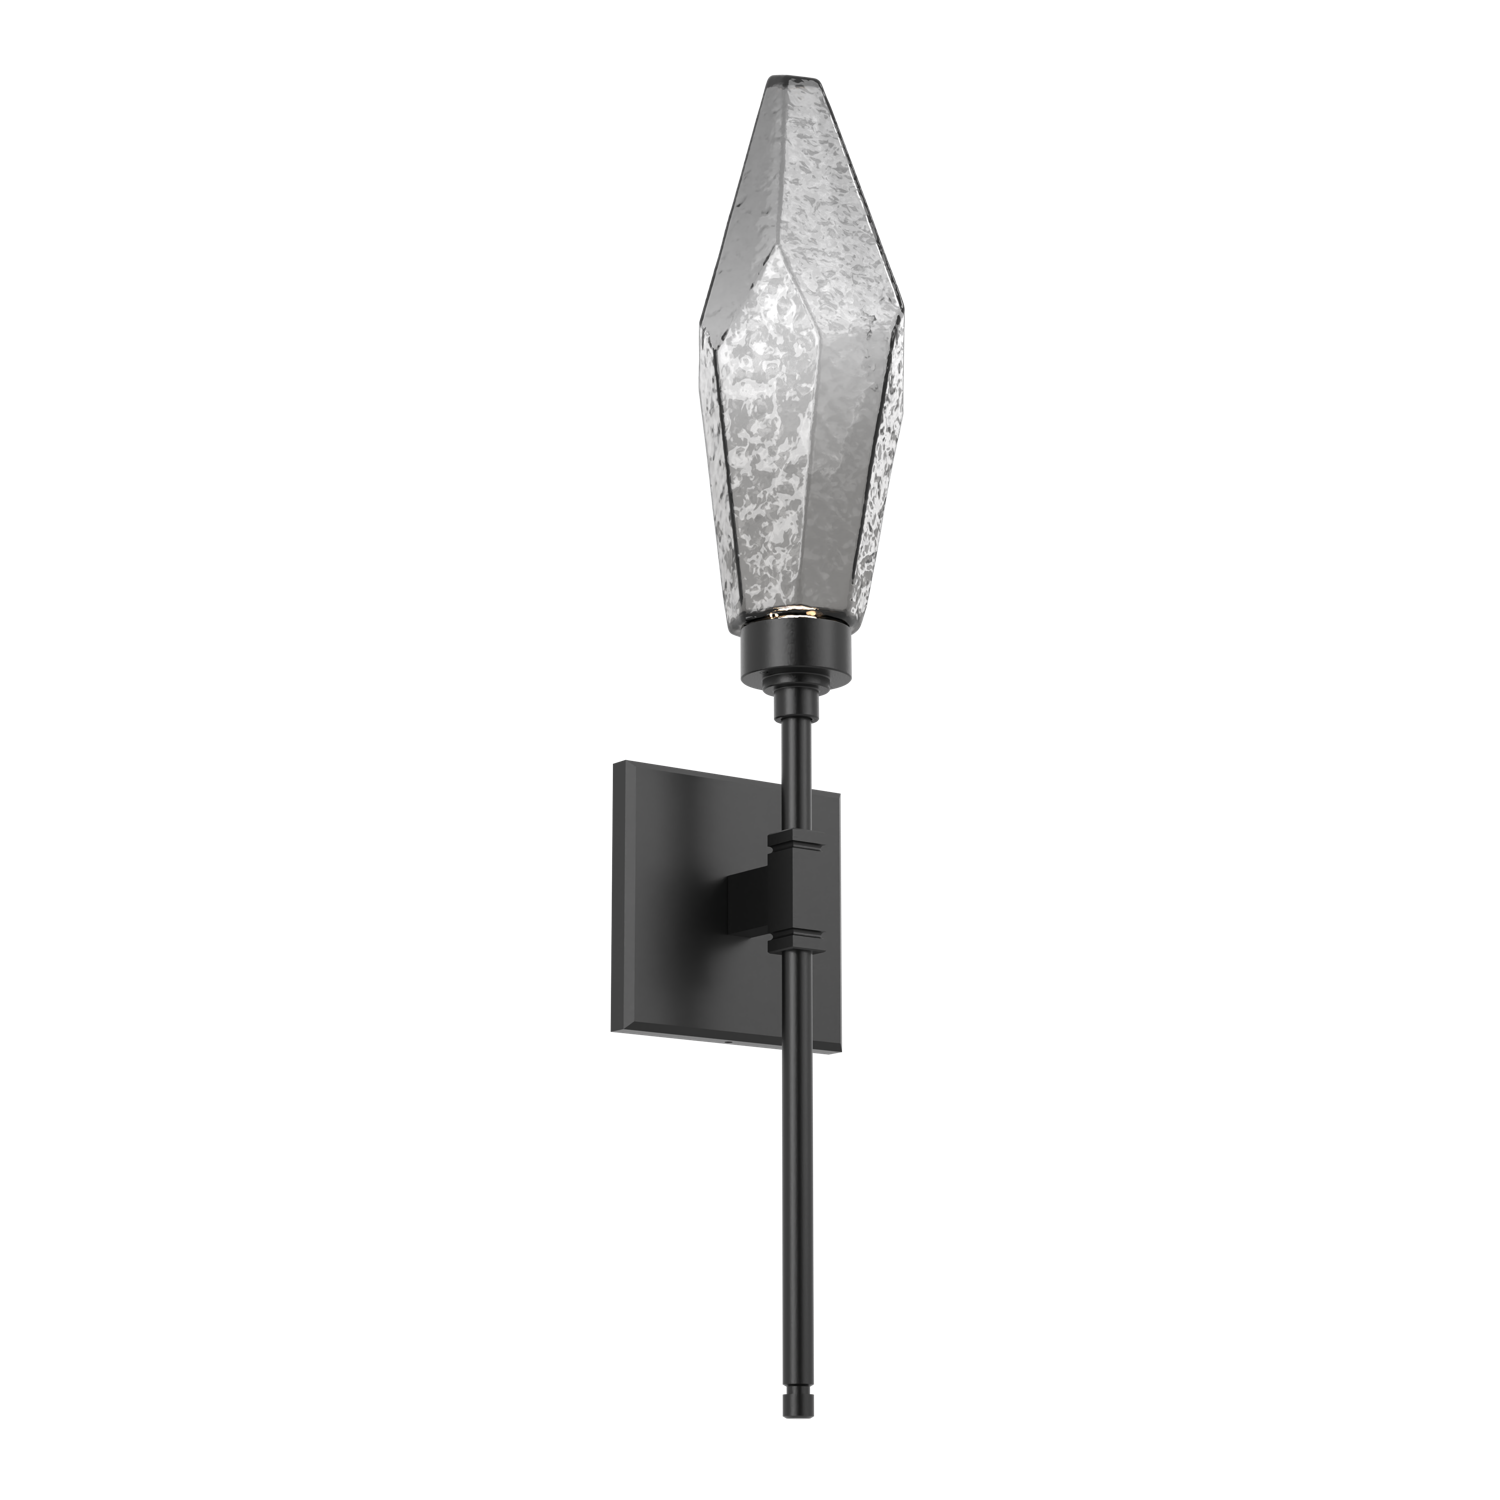 IDB0050-04-MB-CS-Hammerton-Studio-Rock-Crystal-ada-certified-belvedere-wall-sconce-with-matte-black-finish-and-chilled-smoke-glass-shades-and-LED-lamping